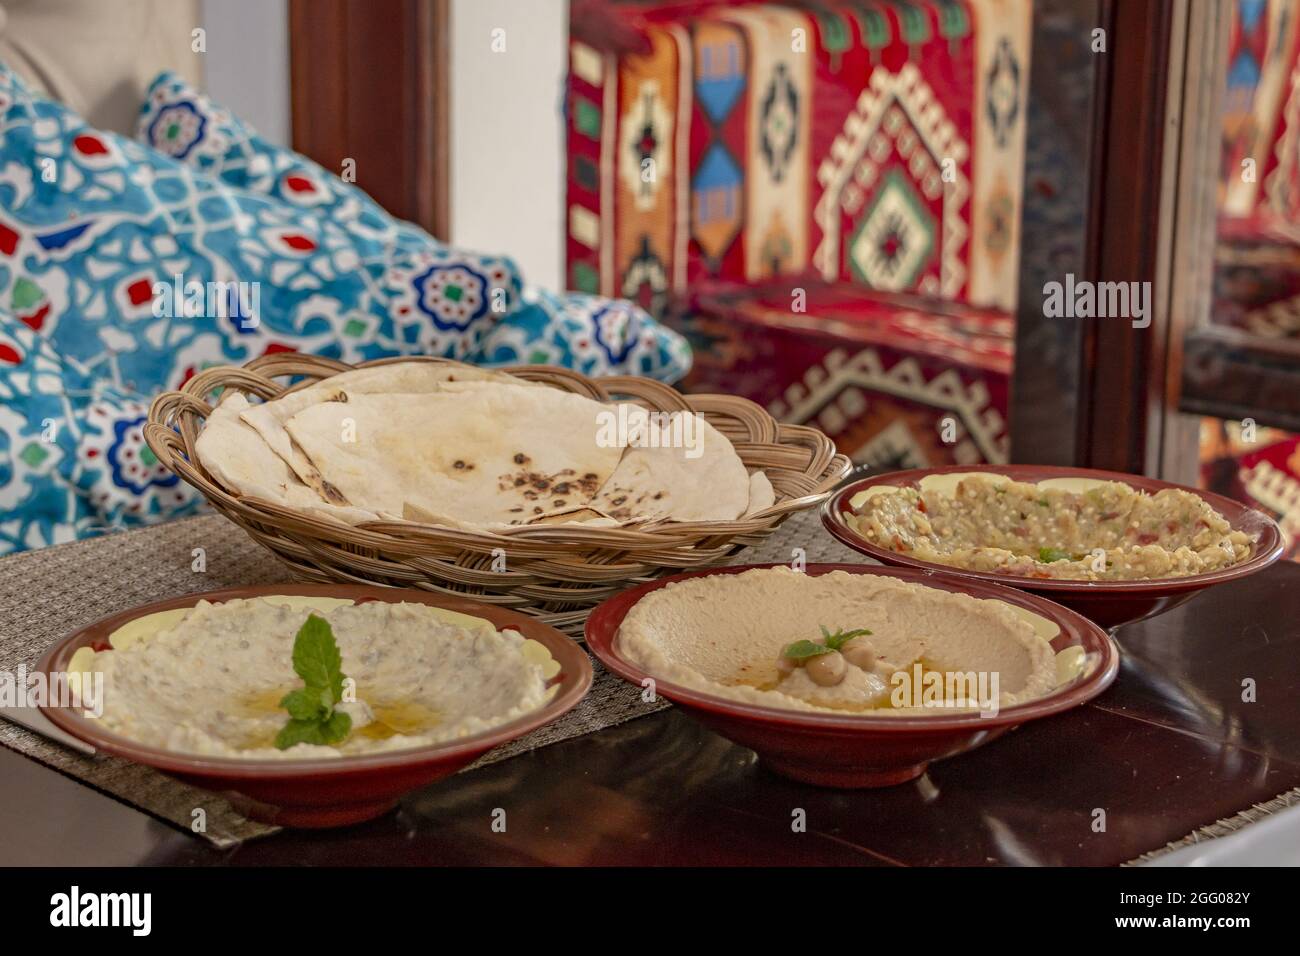 Closeup of bowls of hummus, mutabal and pita bread served at a Middle Eastern cuisine restaurant Stock Photo